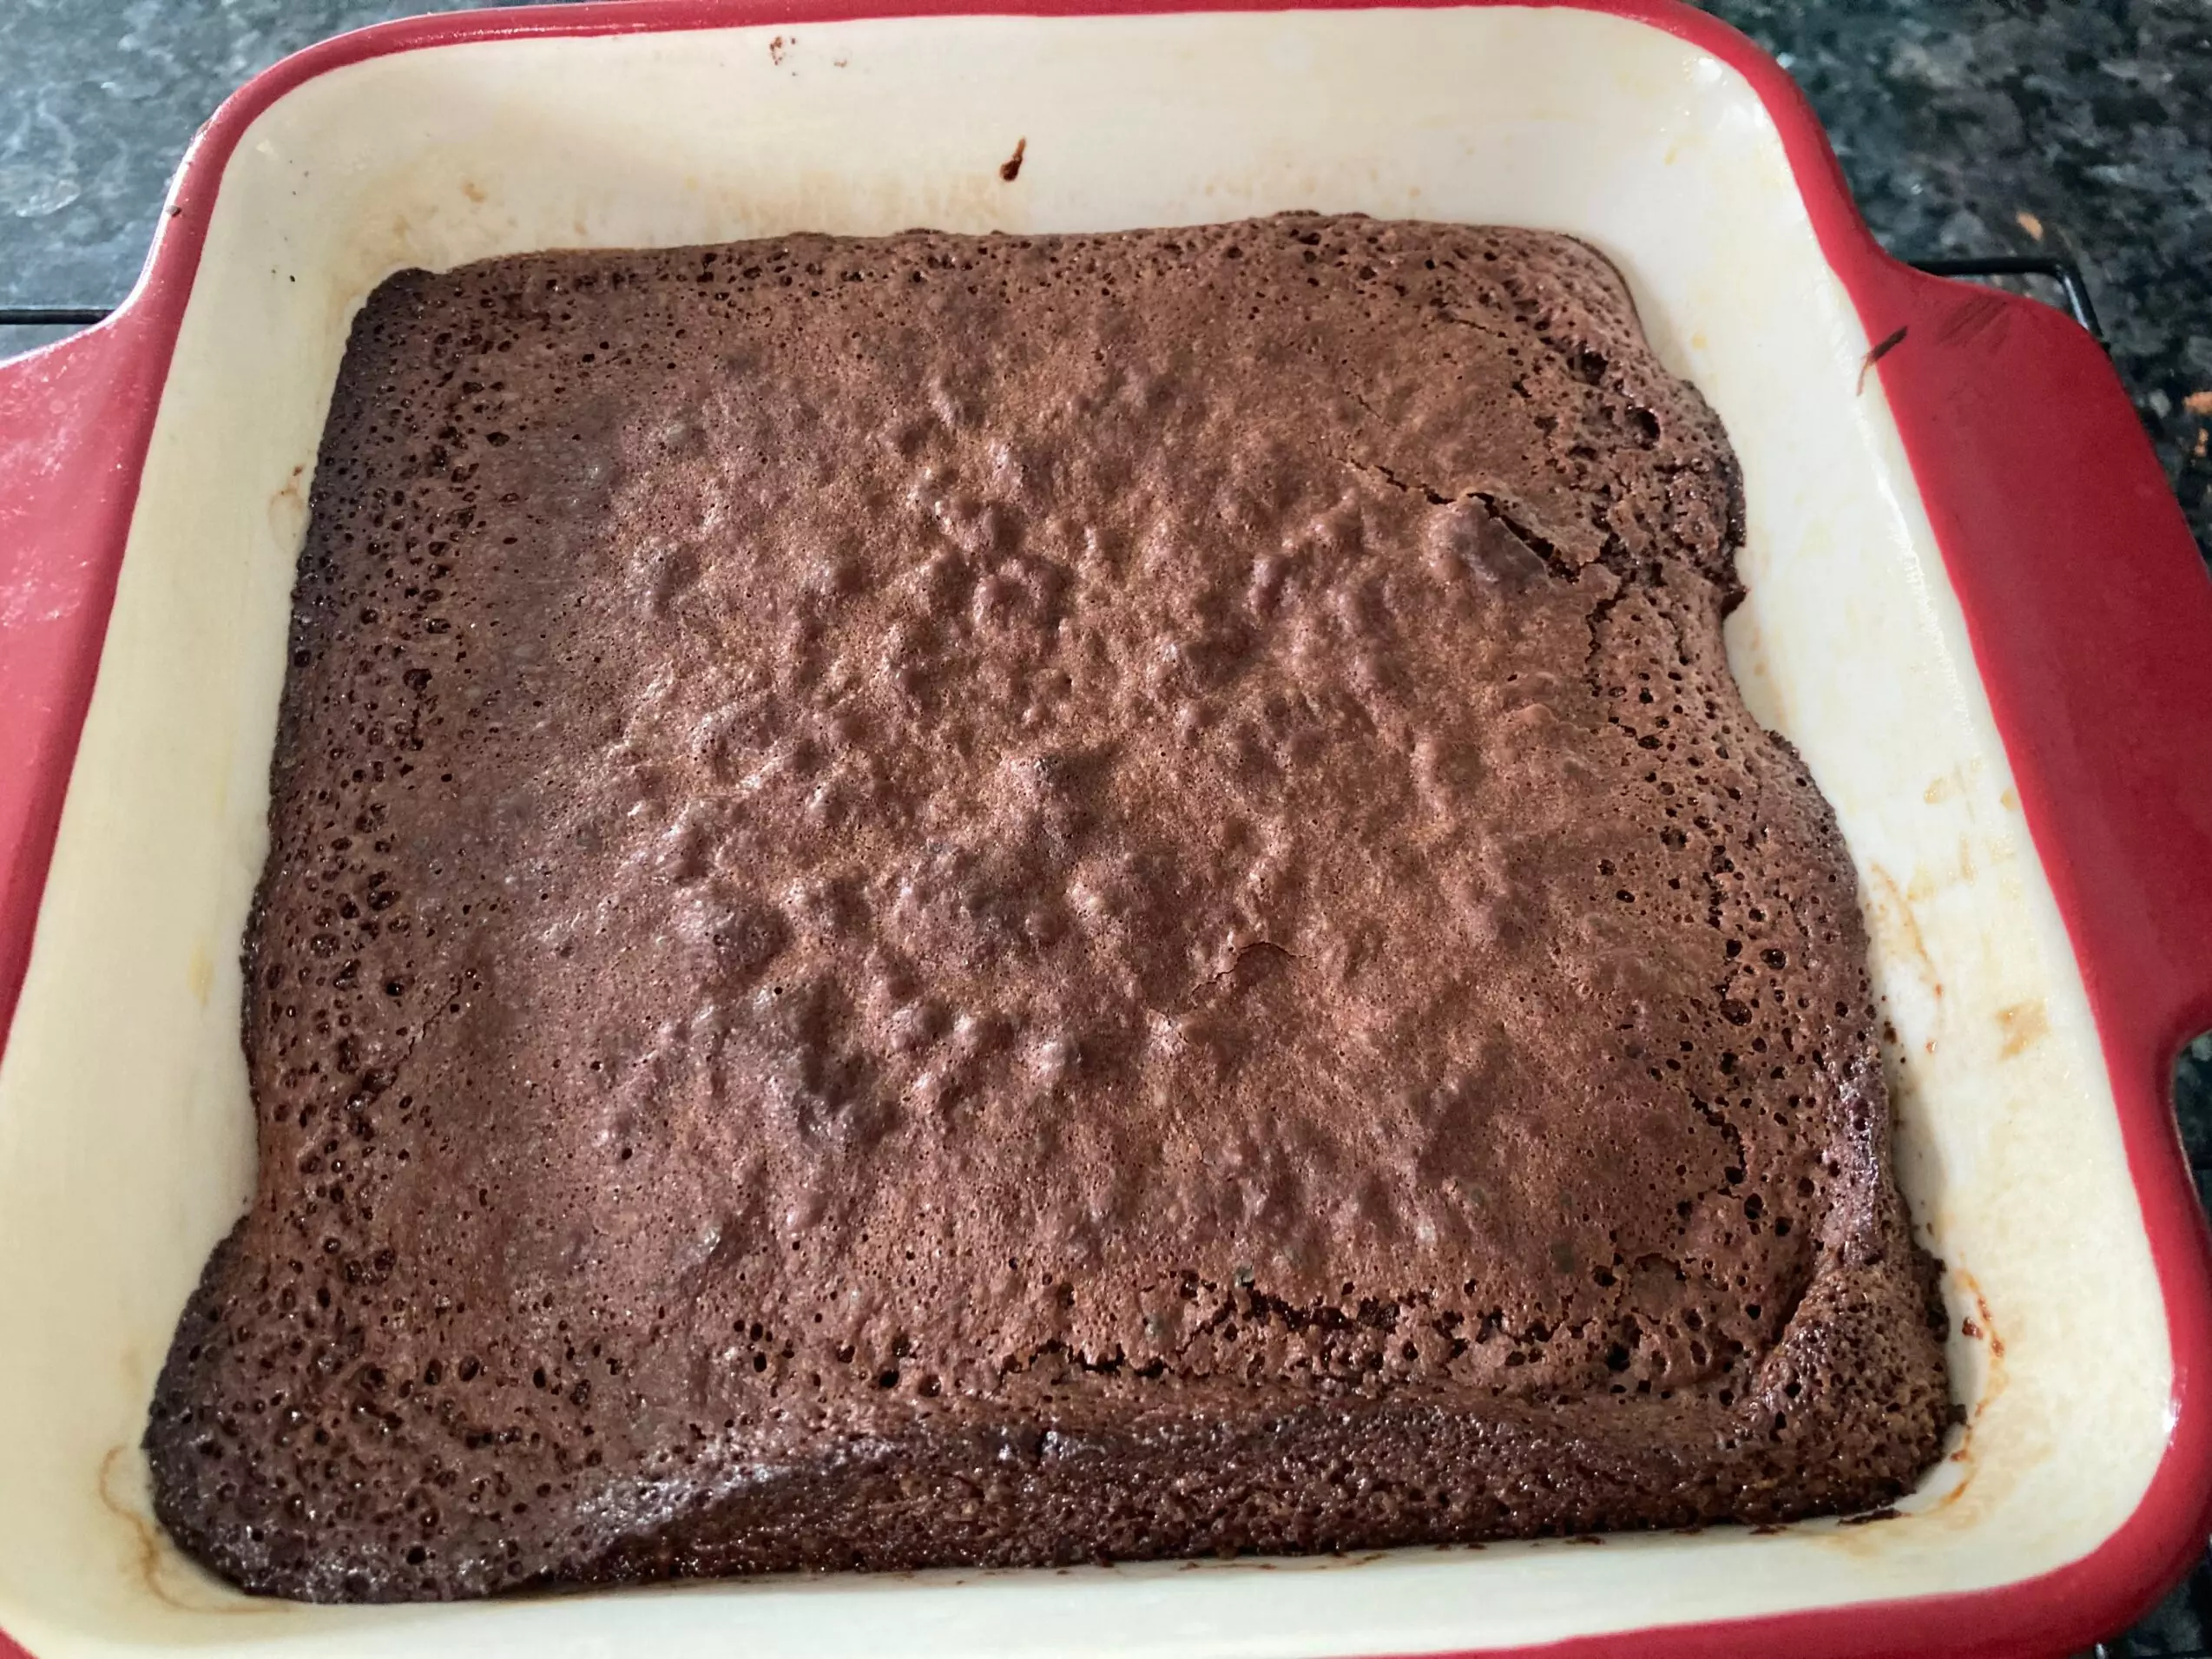 Gluten Free Brownies with Mint Chocolate from Out of the Box Baking.com